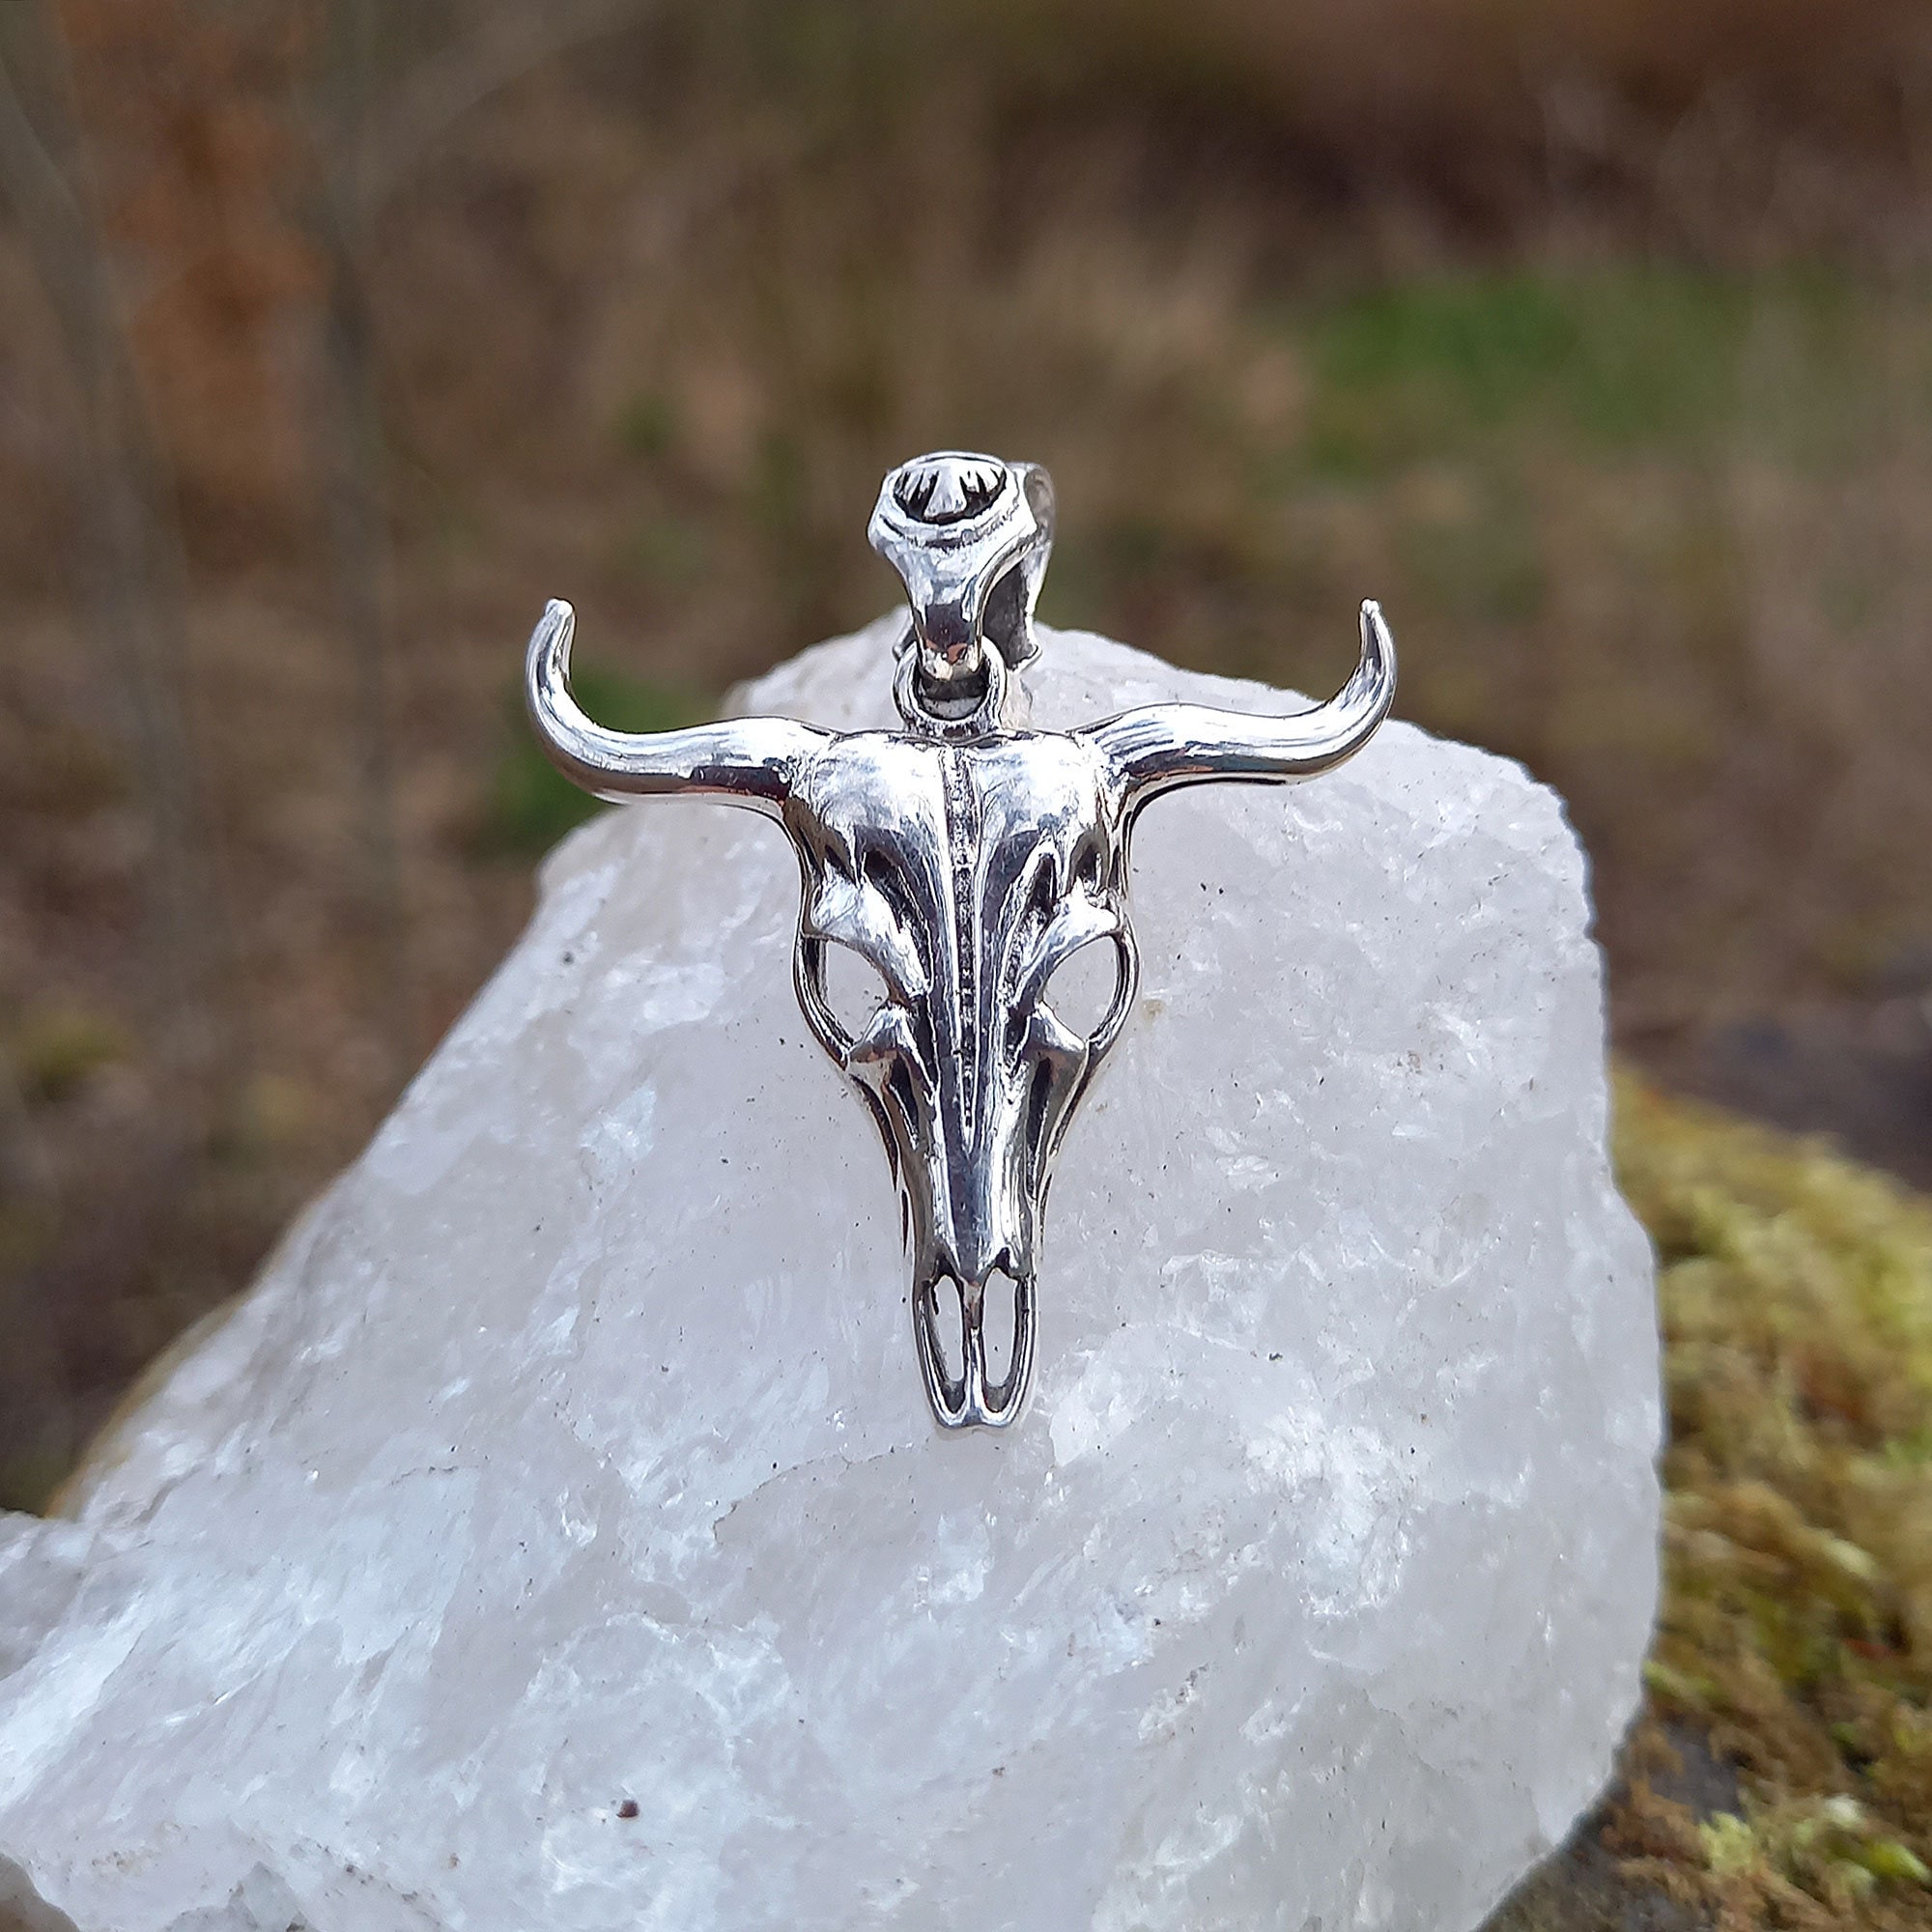 Stainless Steel Cow Bull Head Skull Goat Pendant For Men Stylish Chain  Jewelry Accessory From Qipaoliu, $12.46 | DHgate.Com